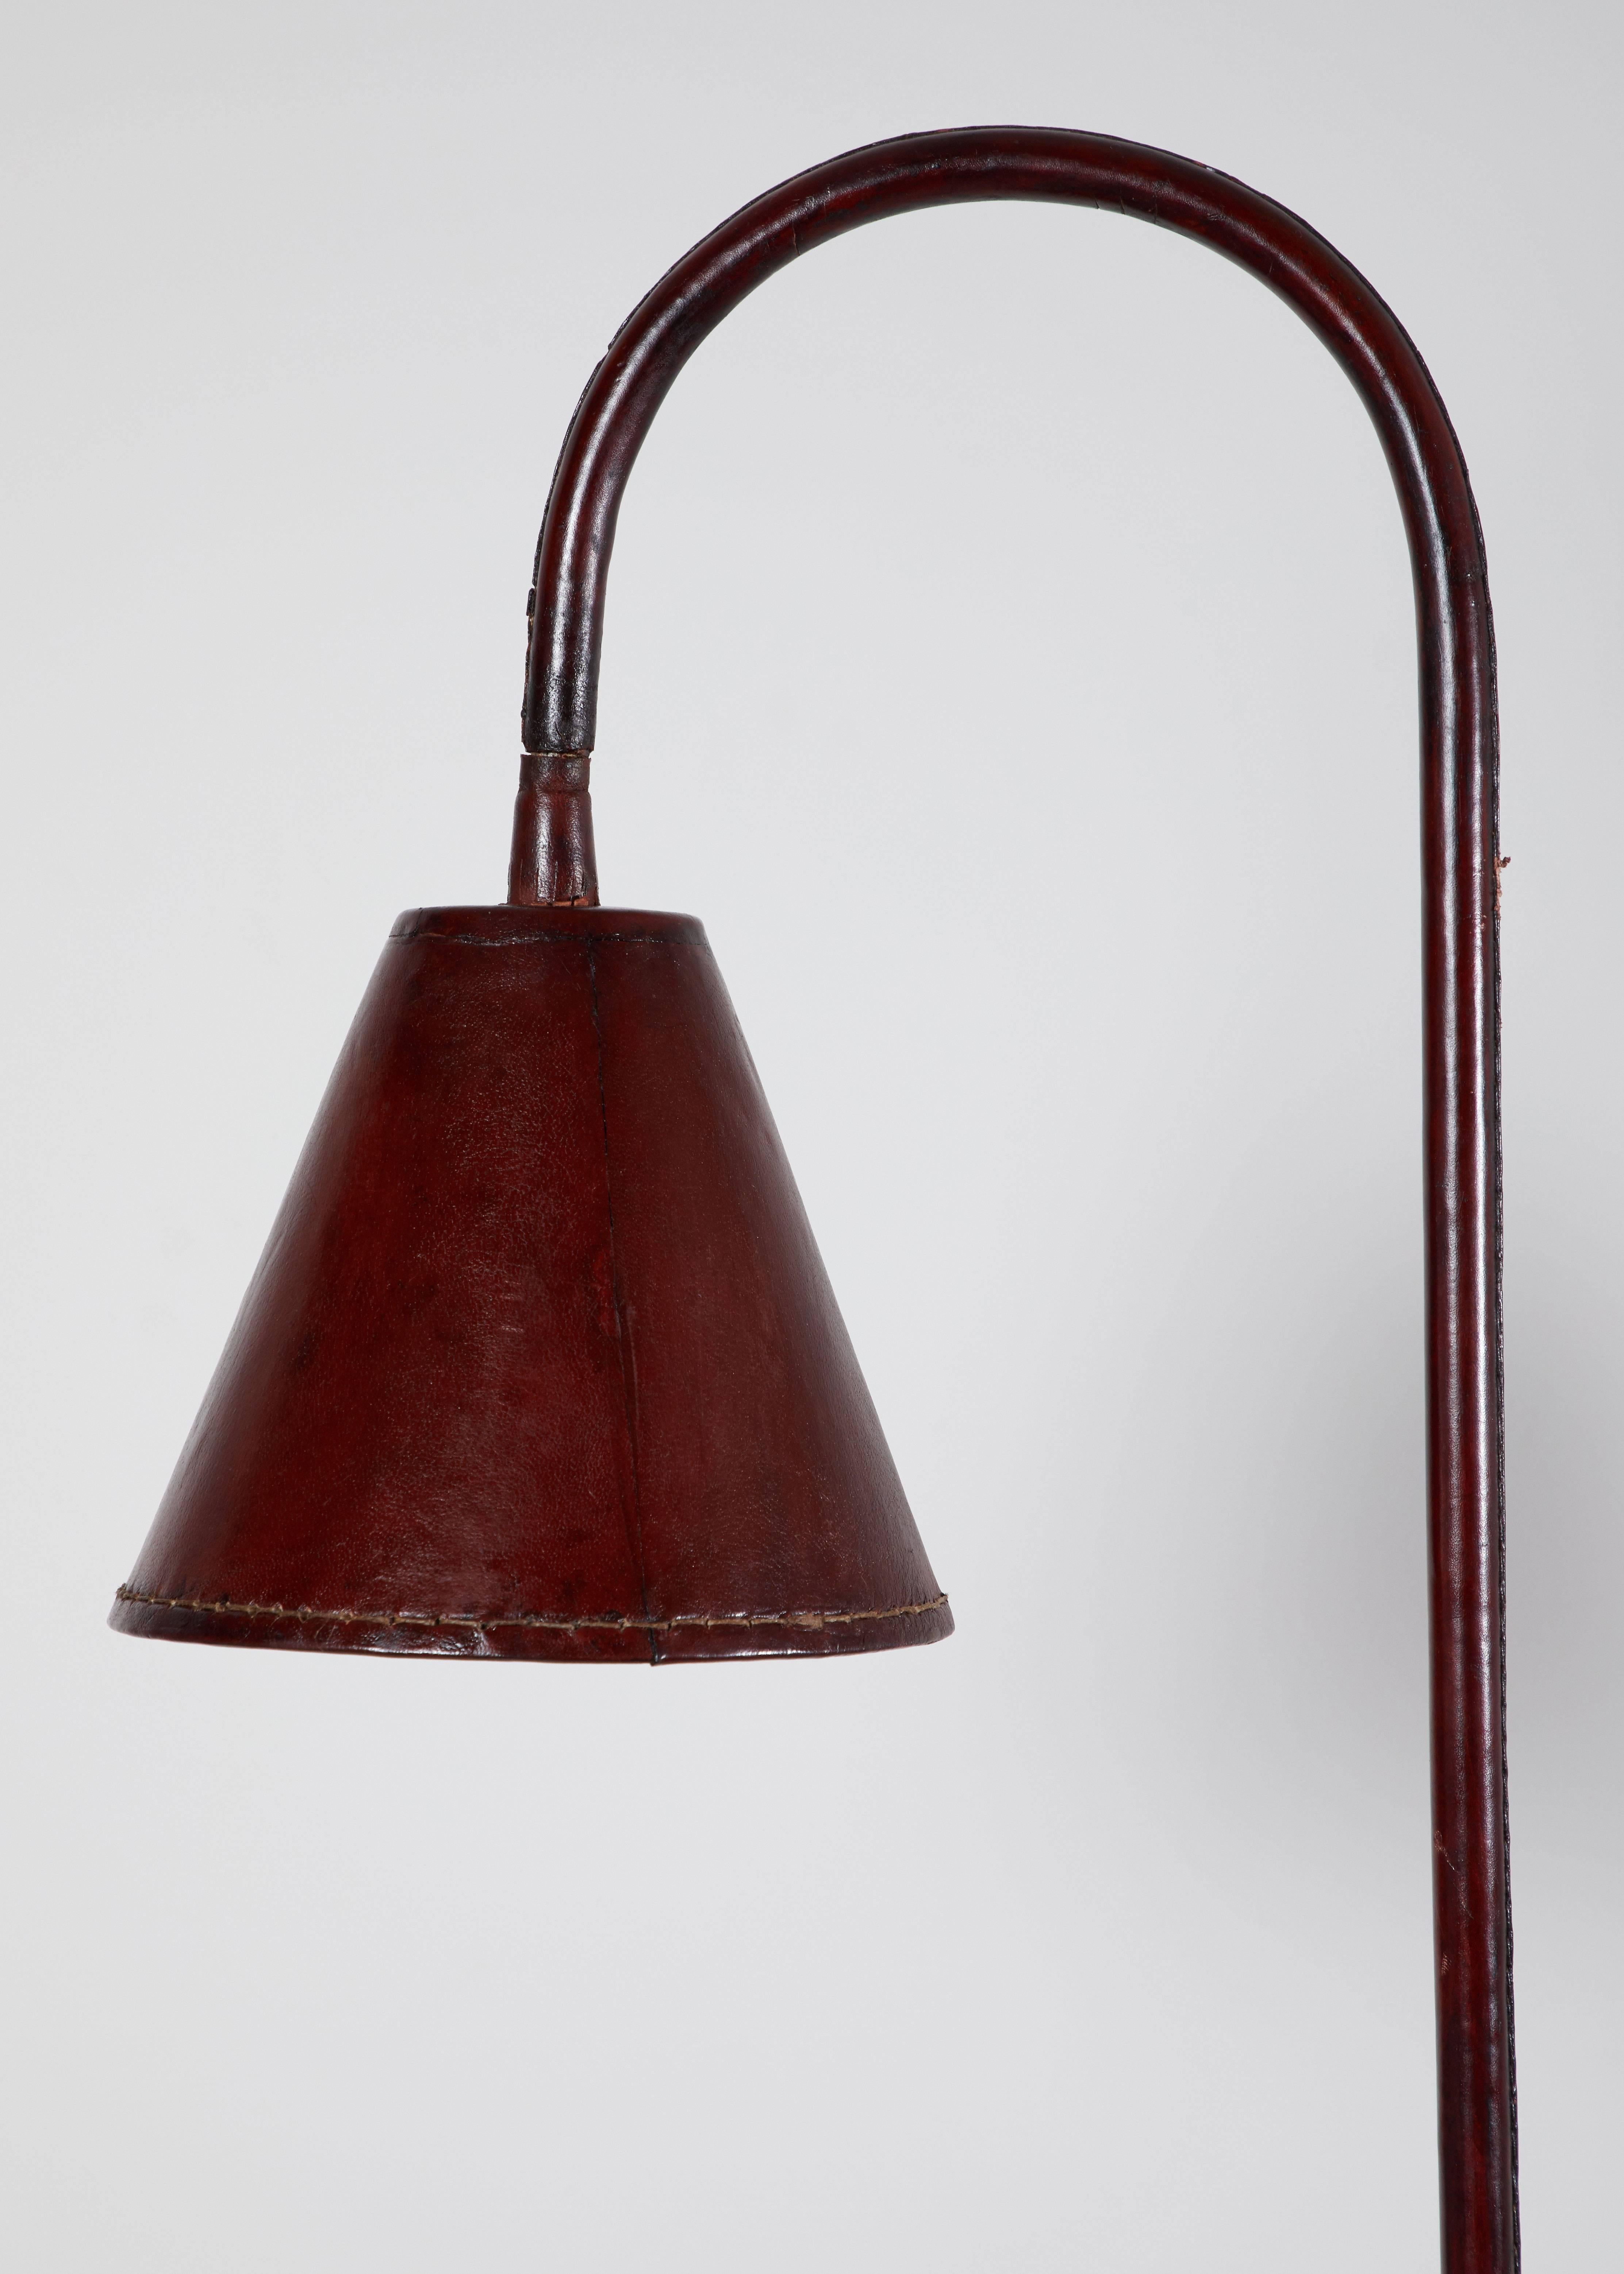 Steel Spanish Leather Wrapped Floor Lamp in the Style of Jacques Adnet